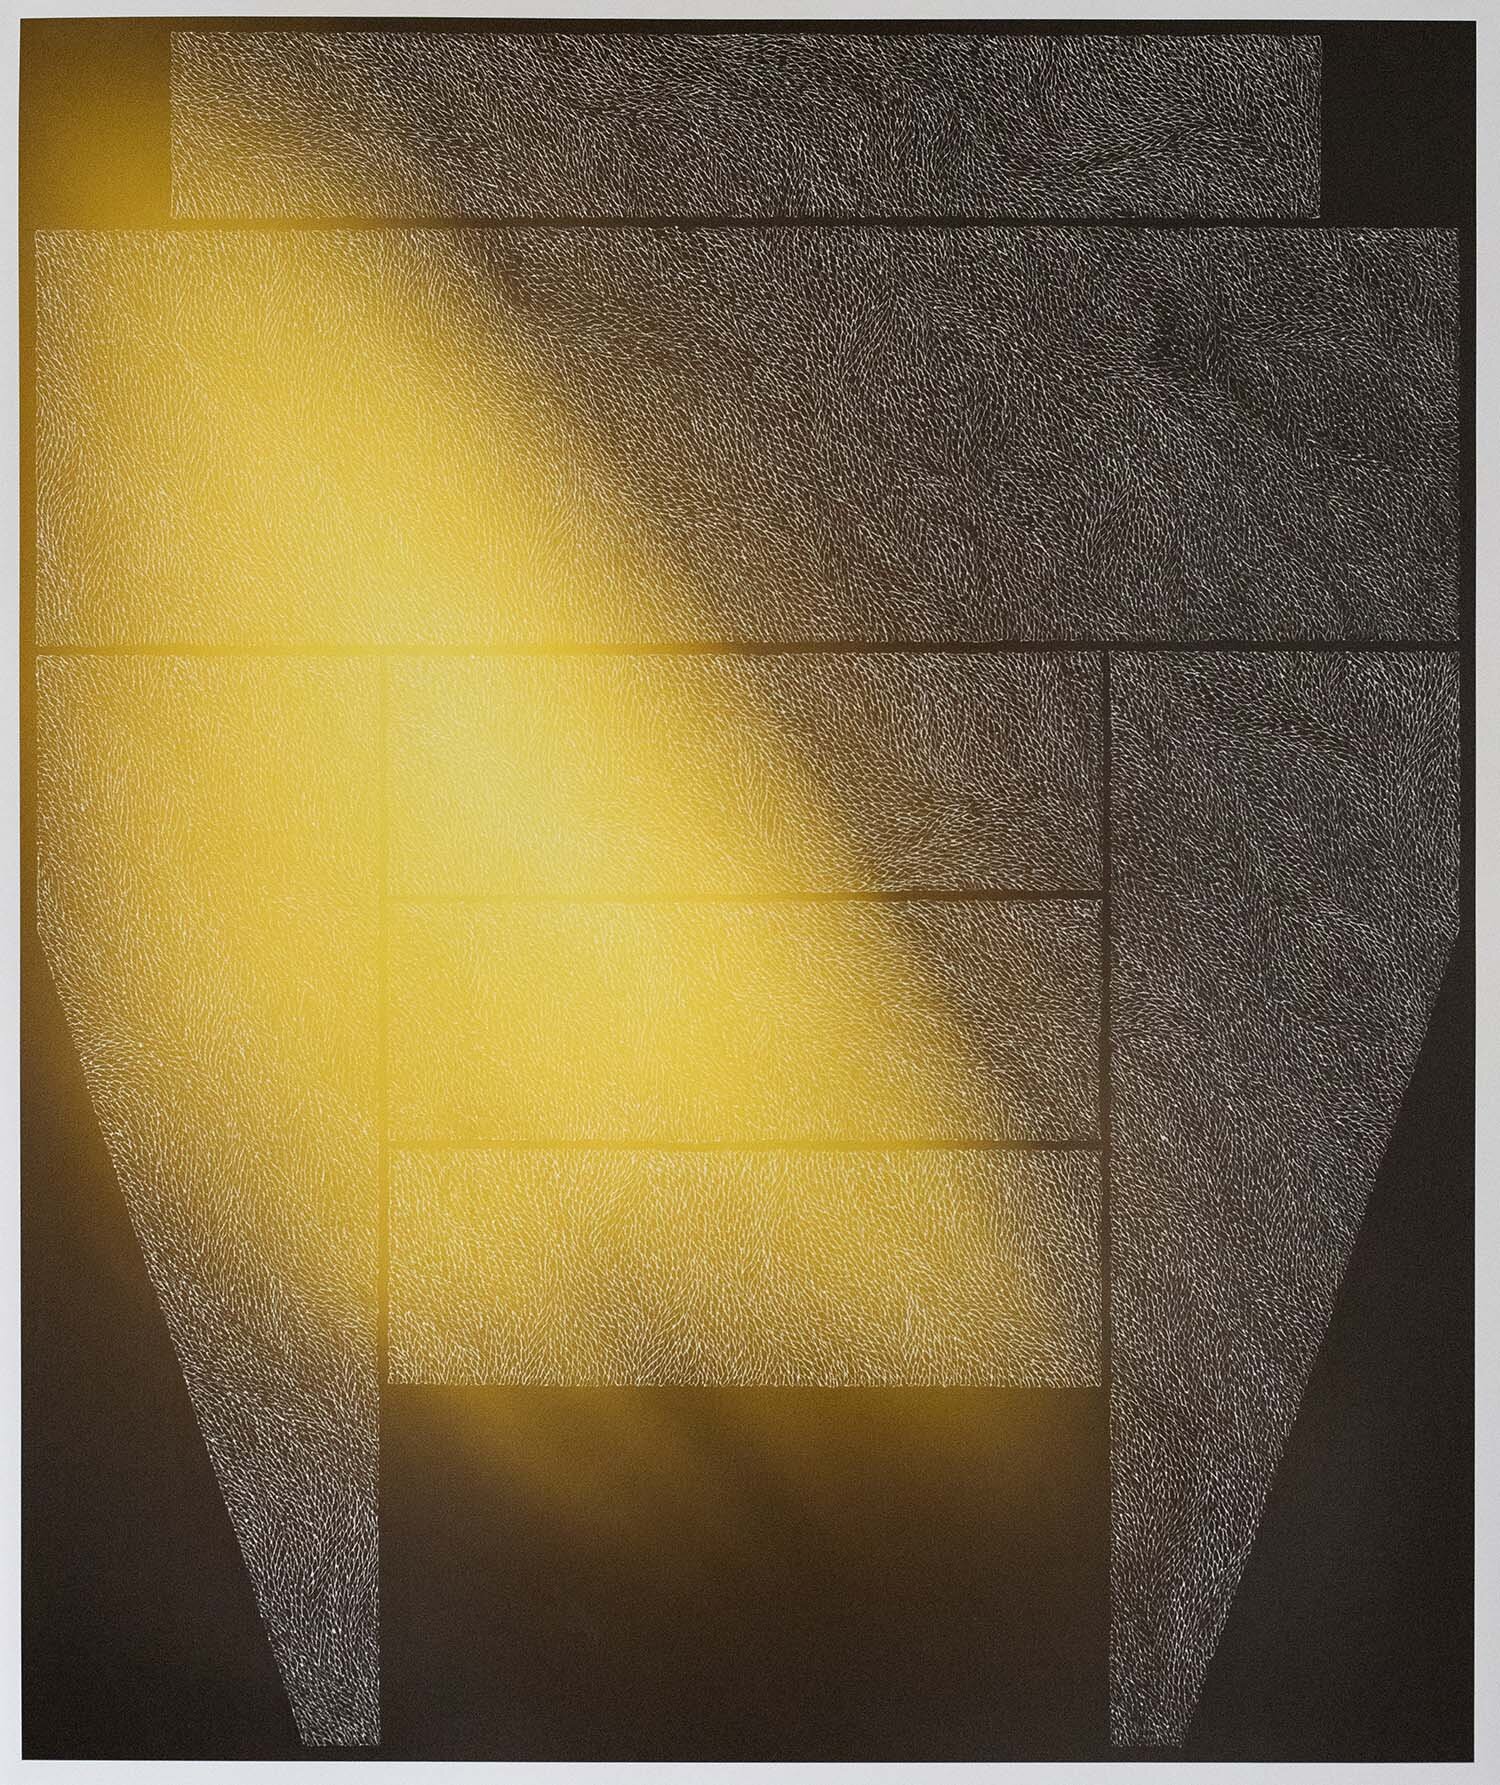   Yellow #1.a  37x30.5 2019 x-acto blade etching on hahnemuhle rag paper   